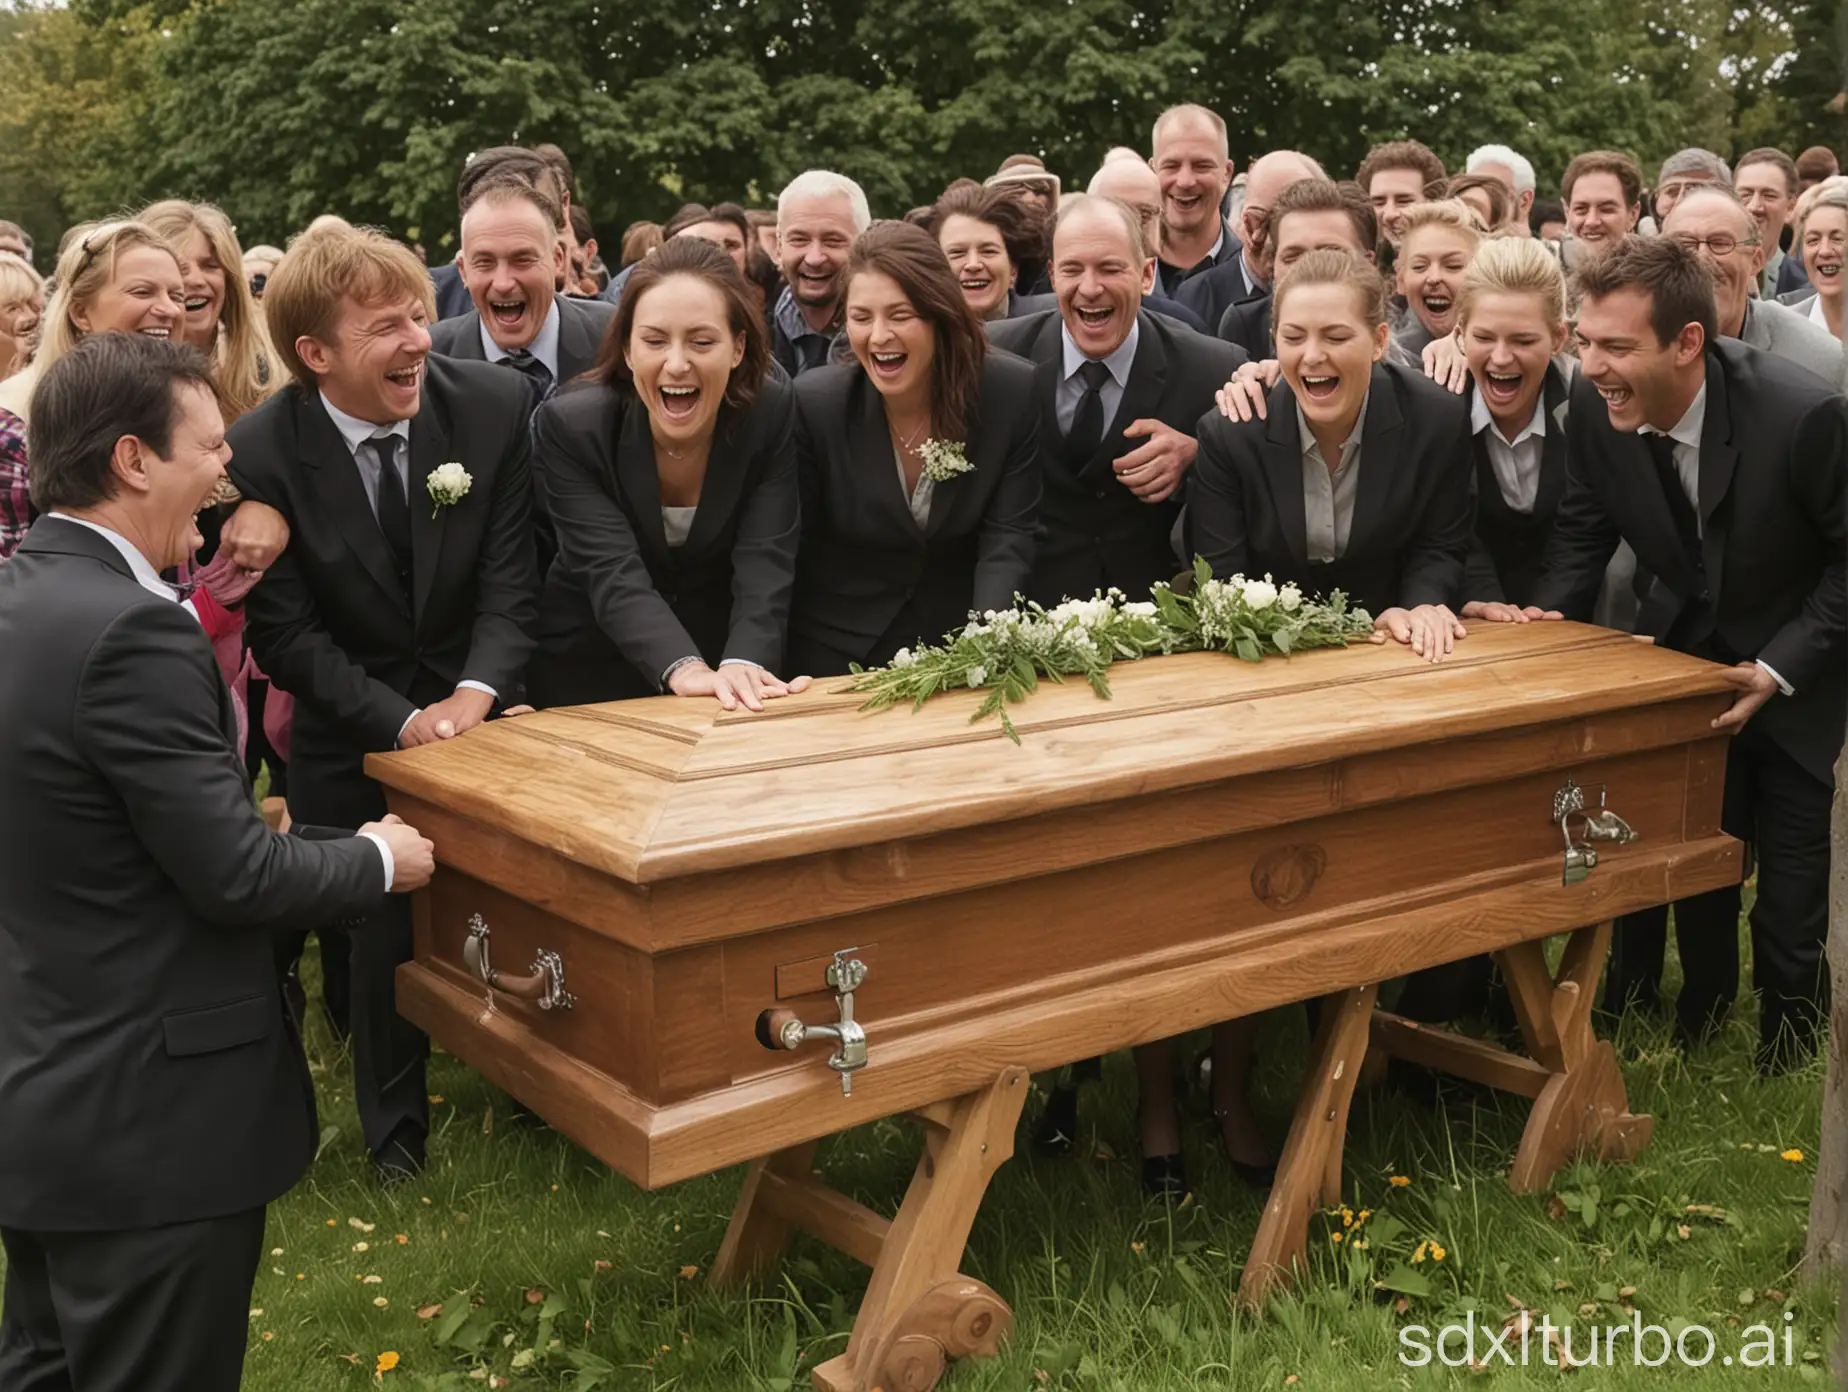 people laughing at a coffin